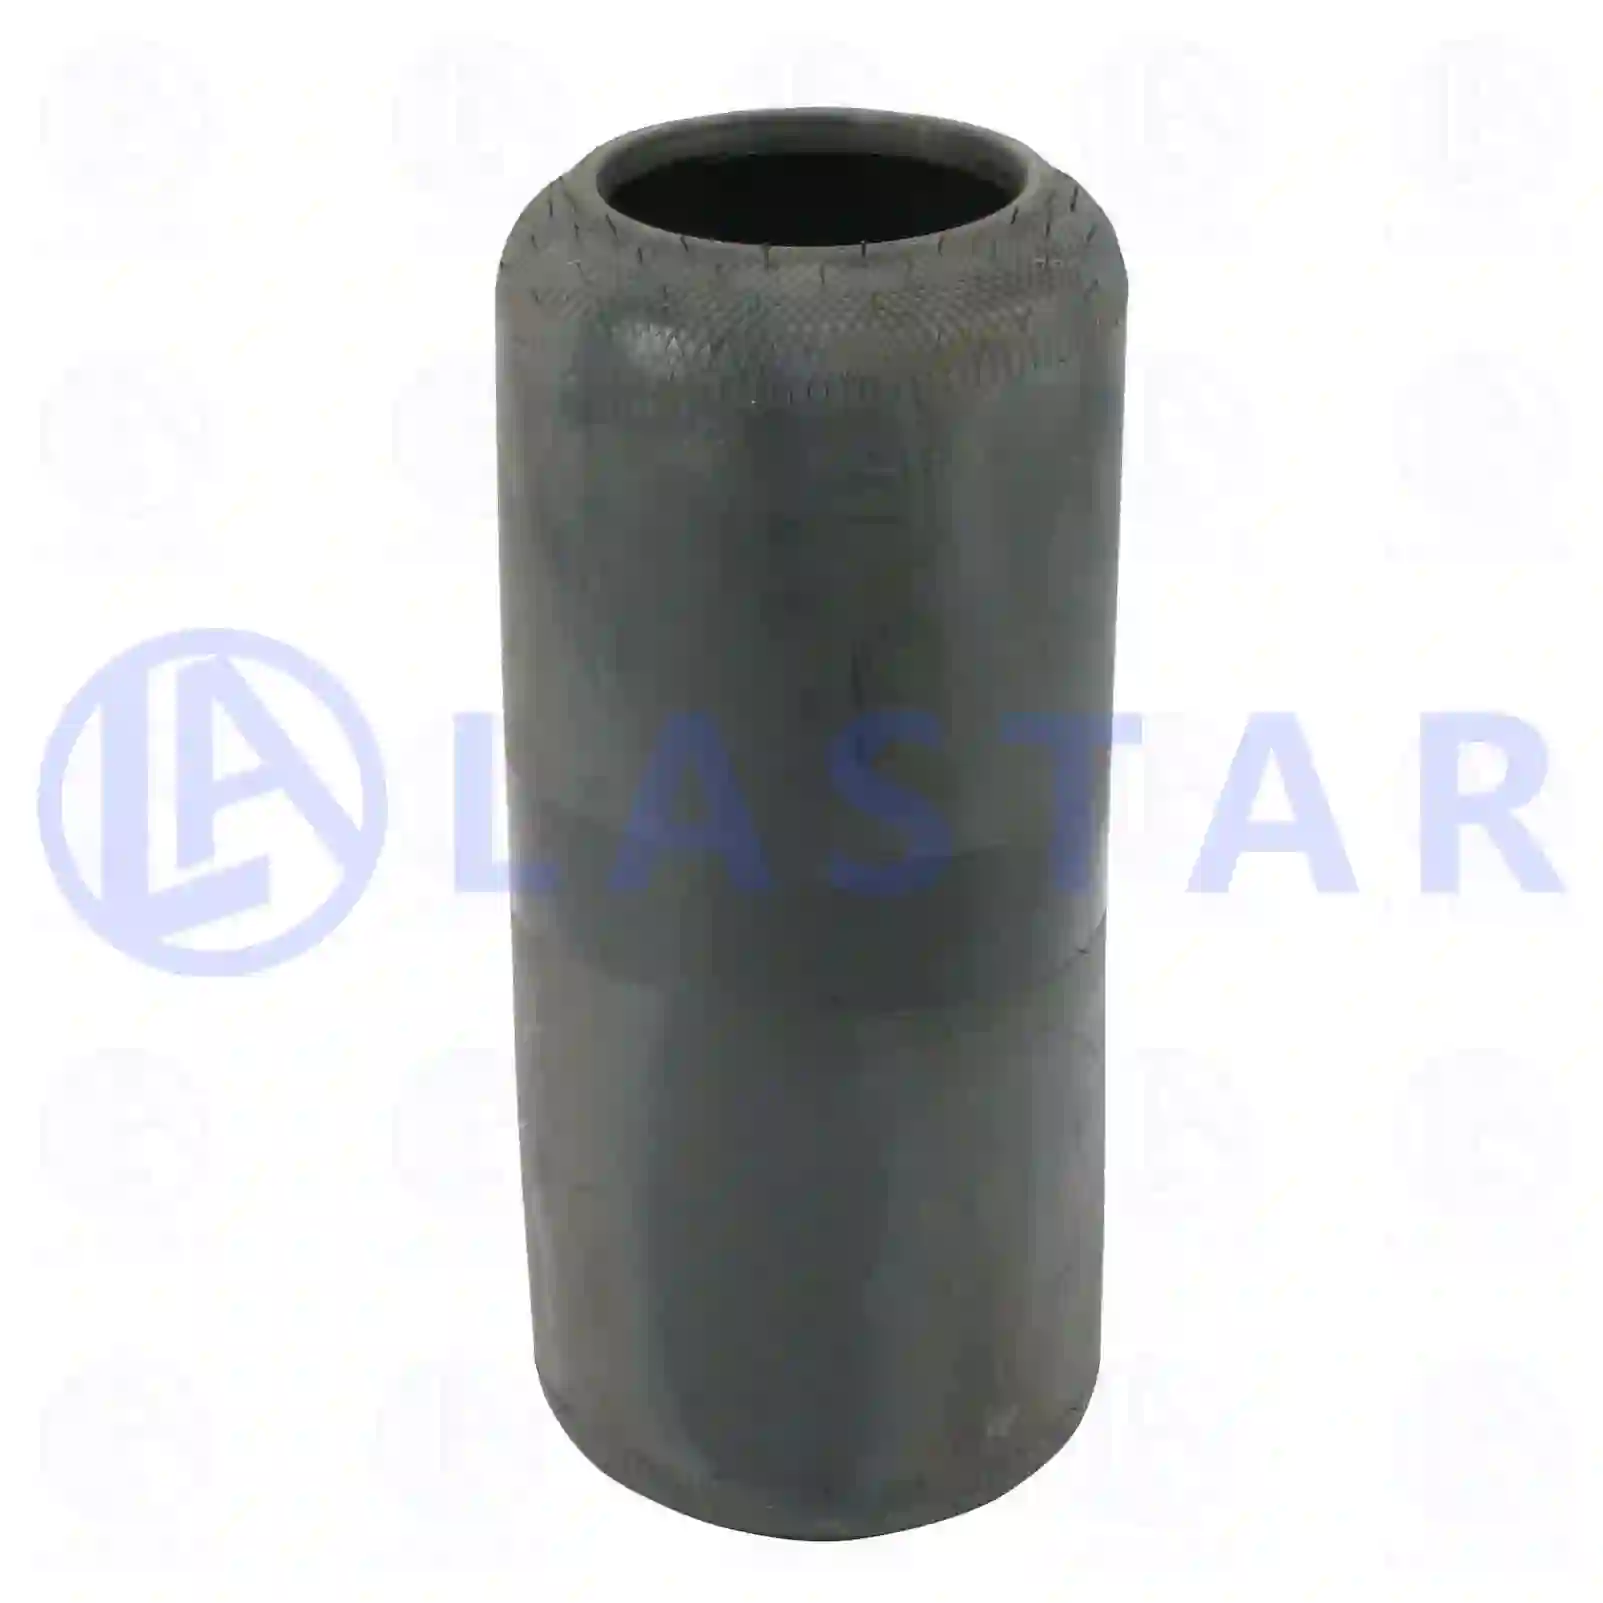 Air spring, without piston, 77727705, 434932, 3116354, ZG40810-0008 ||  77727705 Lastar Spare Part | Truck Spare Parts, Auotomotive Spare Parts Air spring, without piston, 77727705, 434932, 3116354, ZG40810-0008 ||  77727705 Lastar Spare Part | Truck Spare Parts, Auotomotive Spare Parts